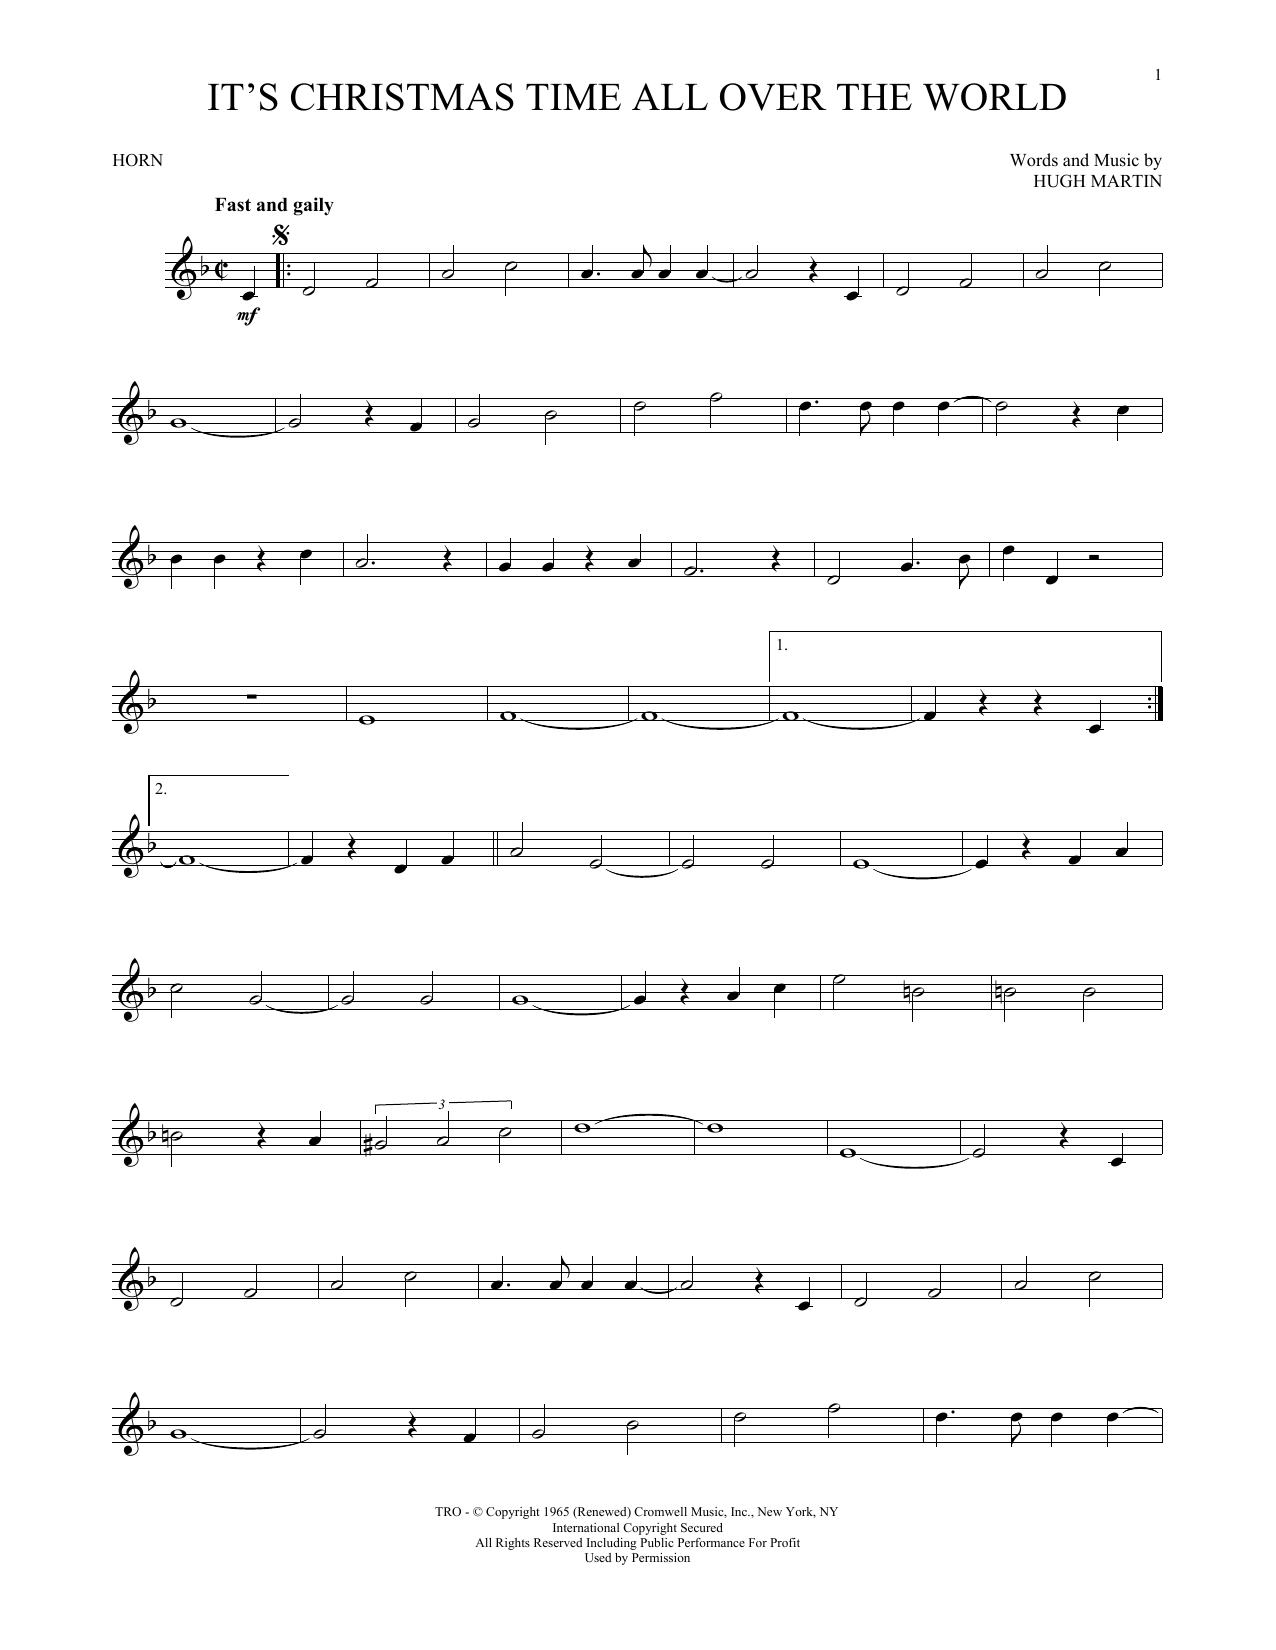 Download Hugh Martin It's Christmas Time All Over The World Sheet Music